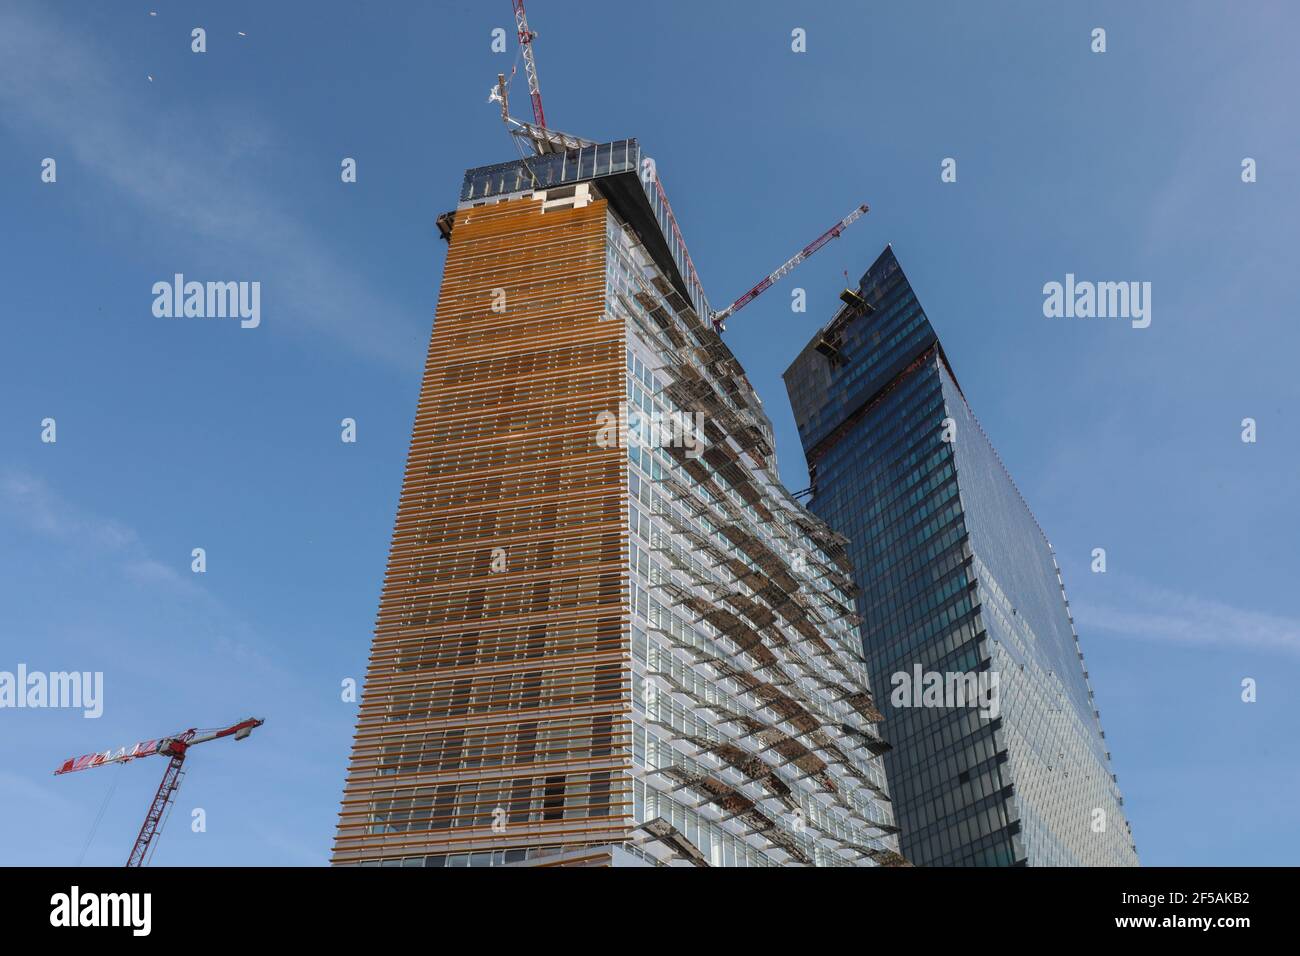 DUO TOWERS BY JEAN NOUVEL Stock Photo